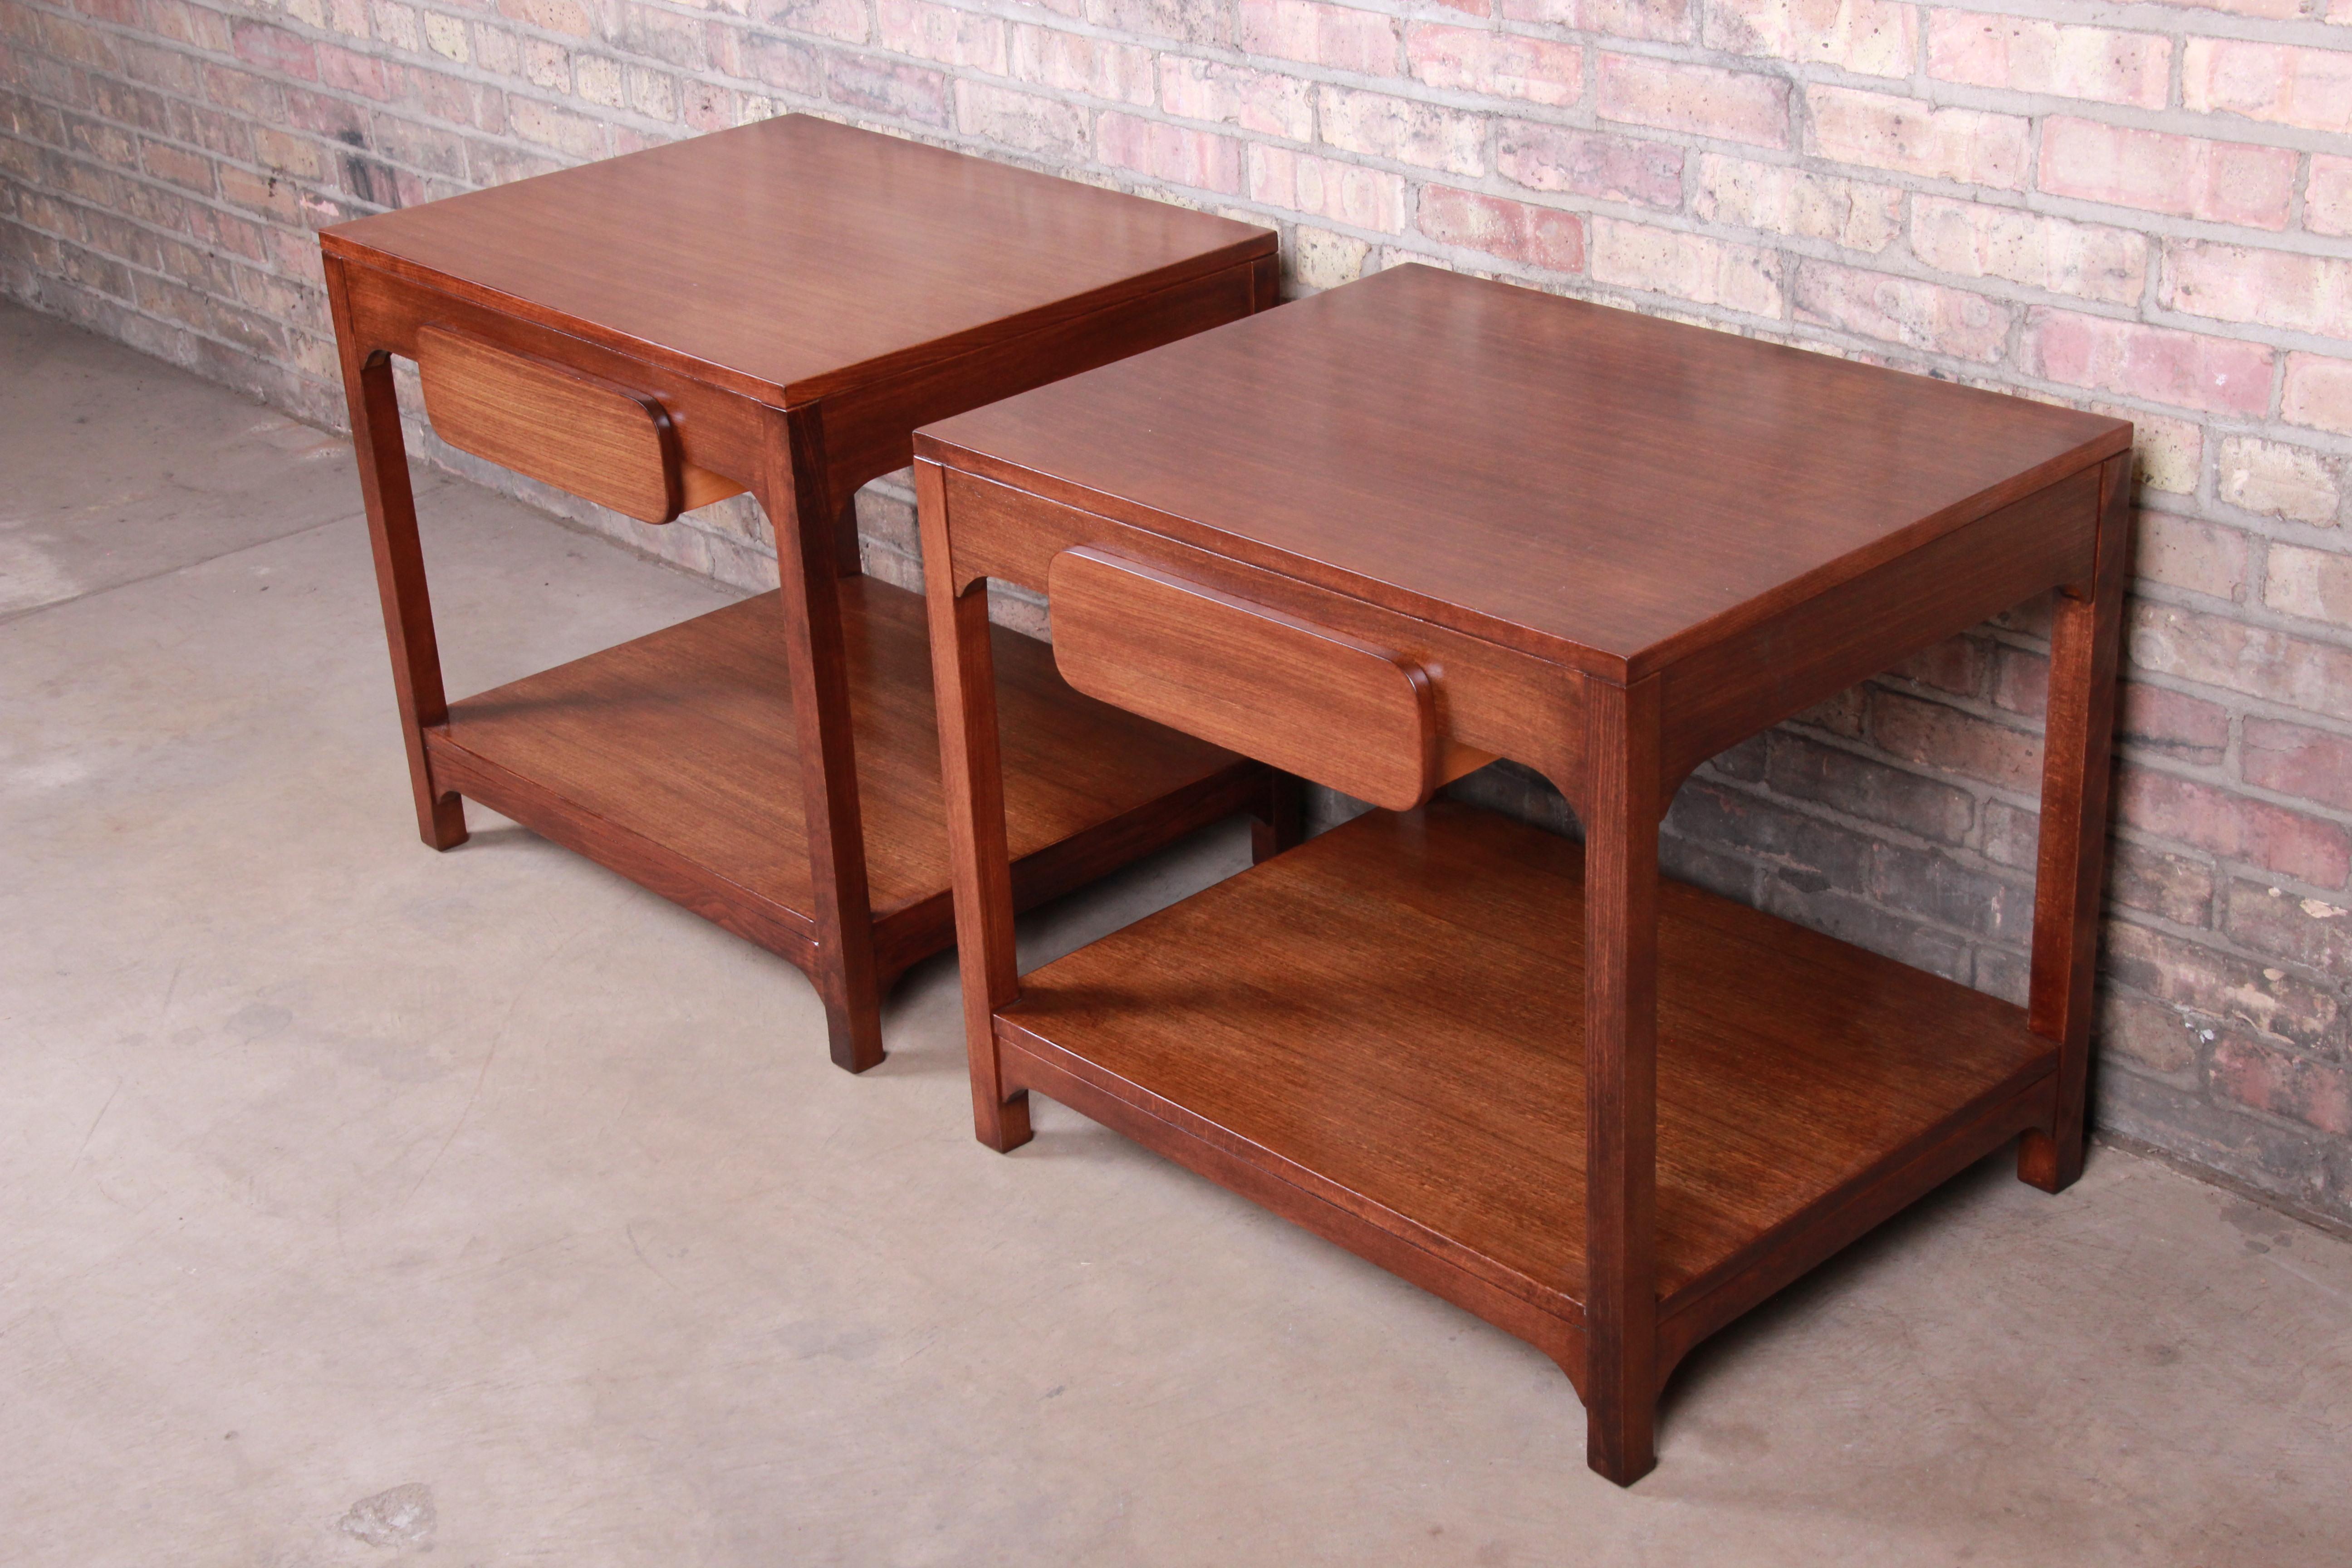 American Edward Wormley for Drexel Precedent Mid-Century Modern Nightstands, Refinished